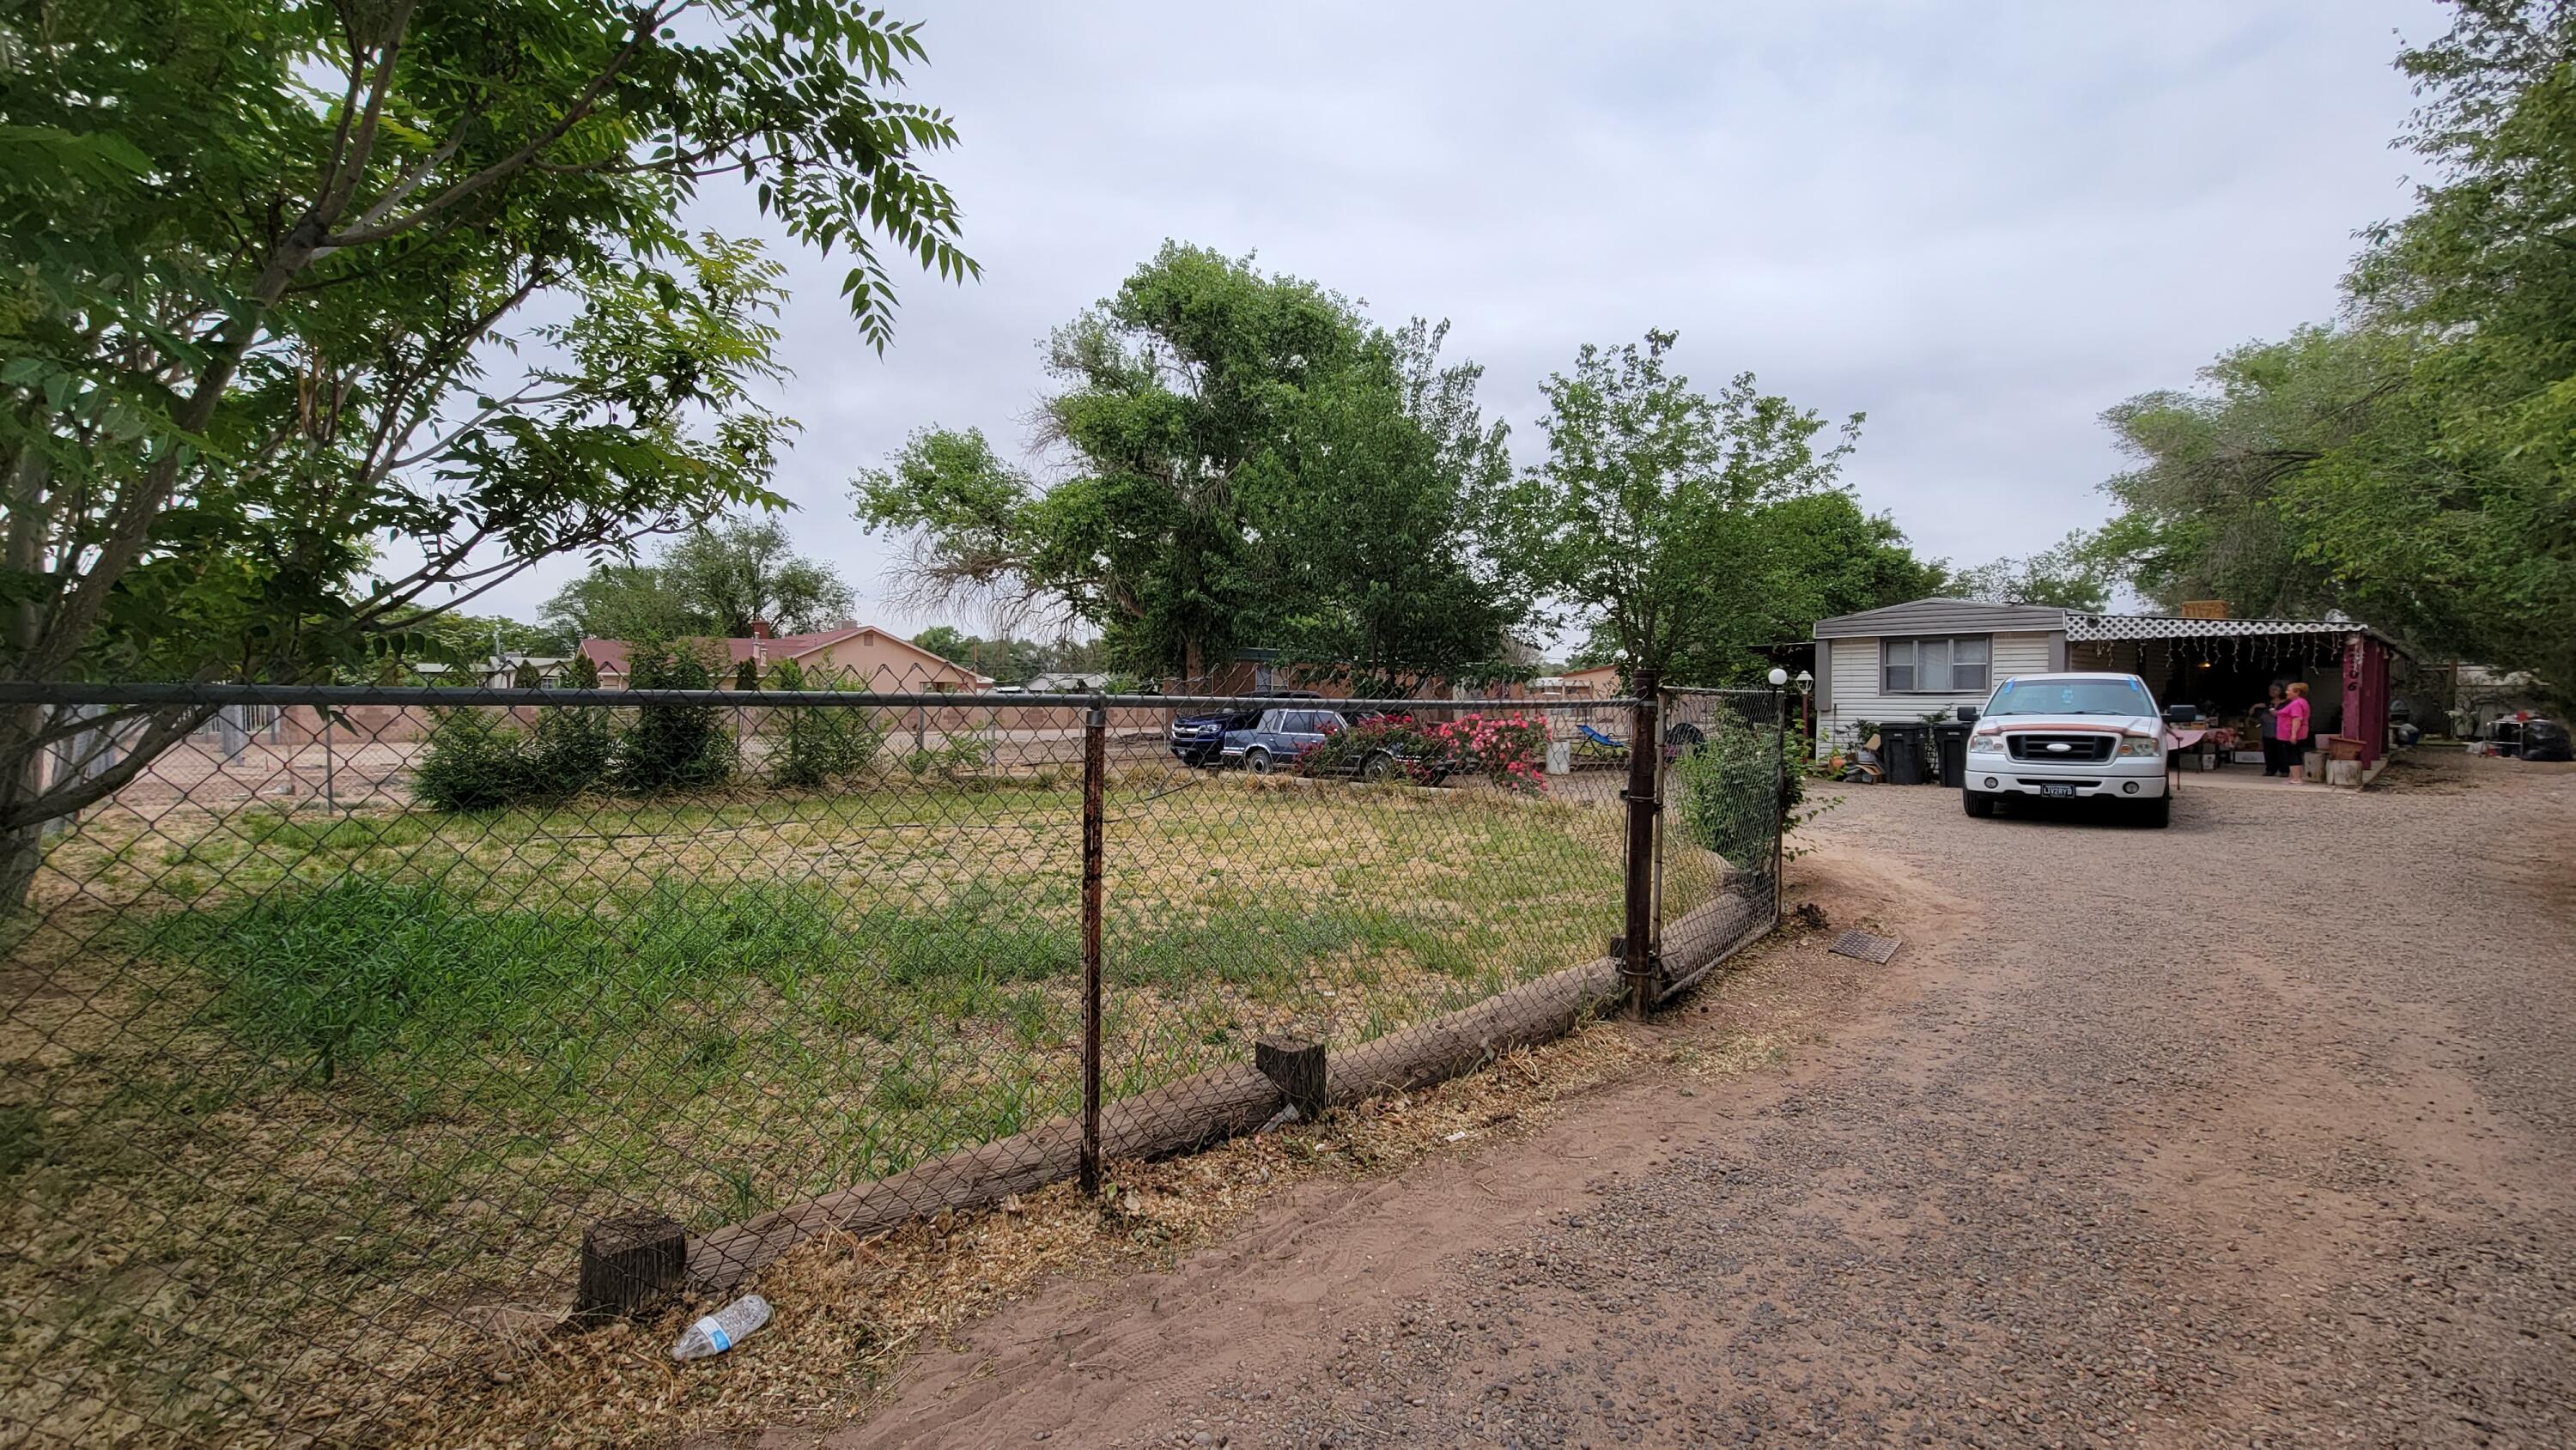 Come see this well maintained 3 bedroom 1 3/4 bath mobile home on .51 acres with an irrigation well, 2 carports, 2 storage sheds, a wheel chair accessible ramp and a covered patio!  This one owner home has a newly remodeled bathroom and comes with all appliances including refrigerator, washer and dryer and all the land you need near the city!